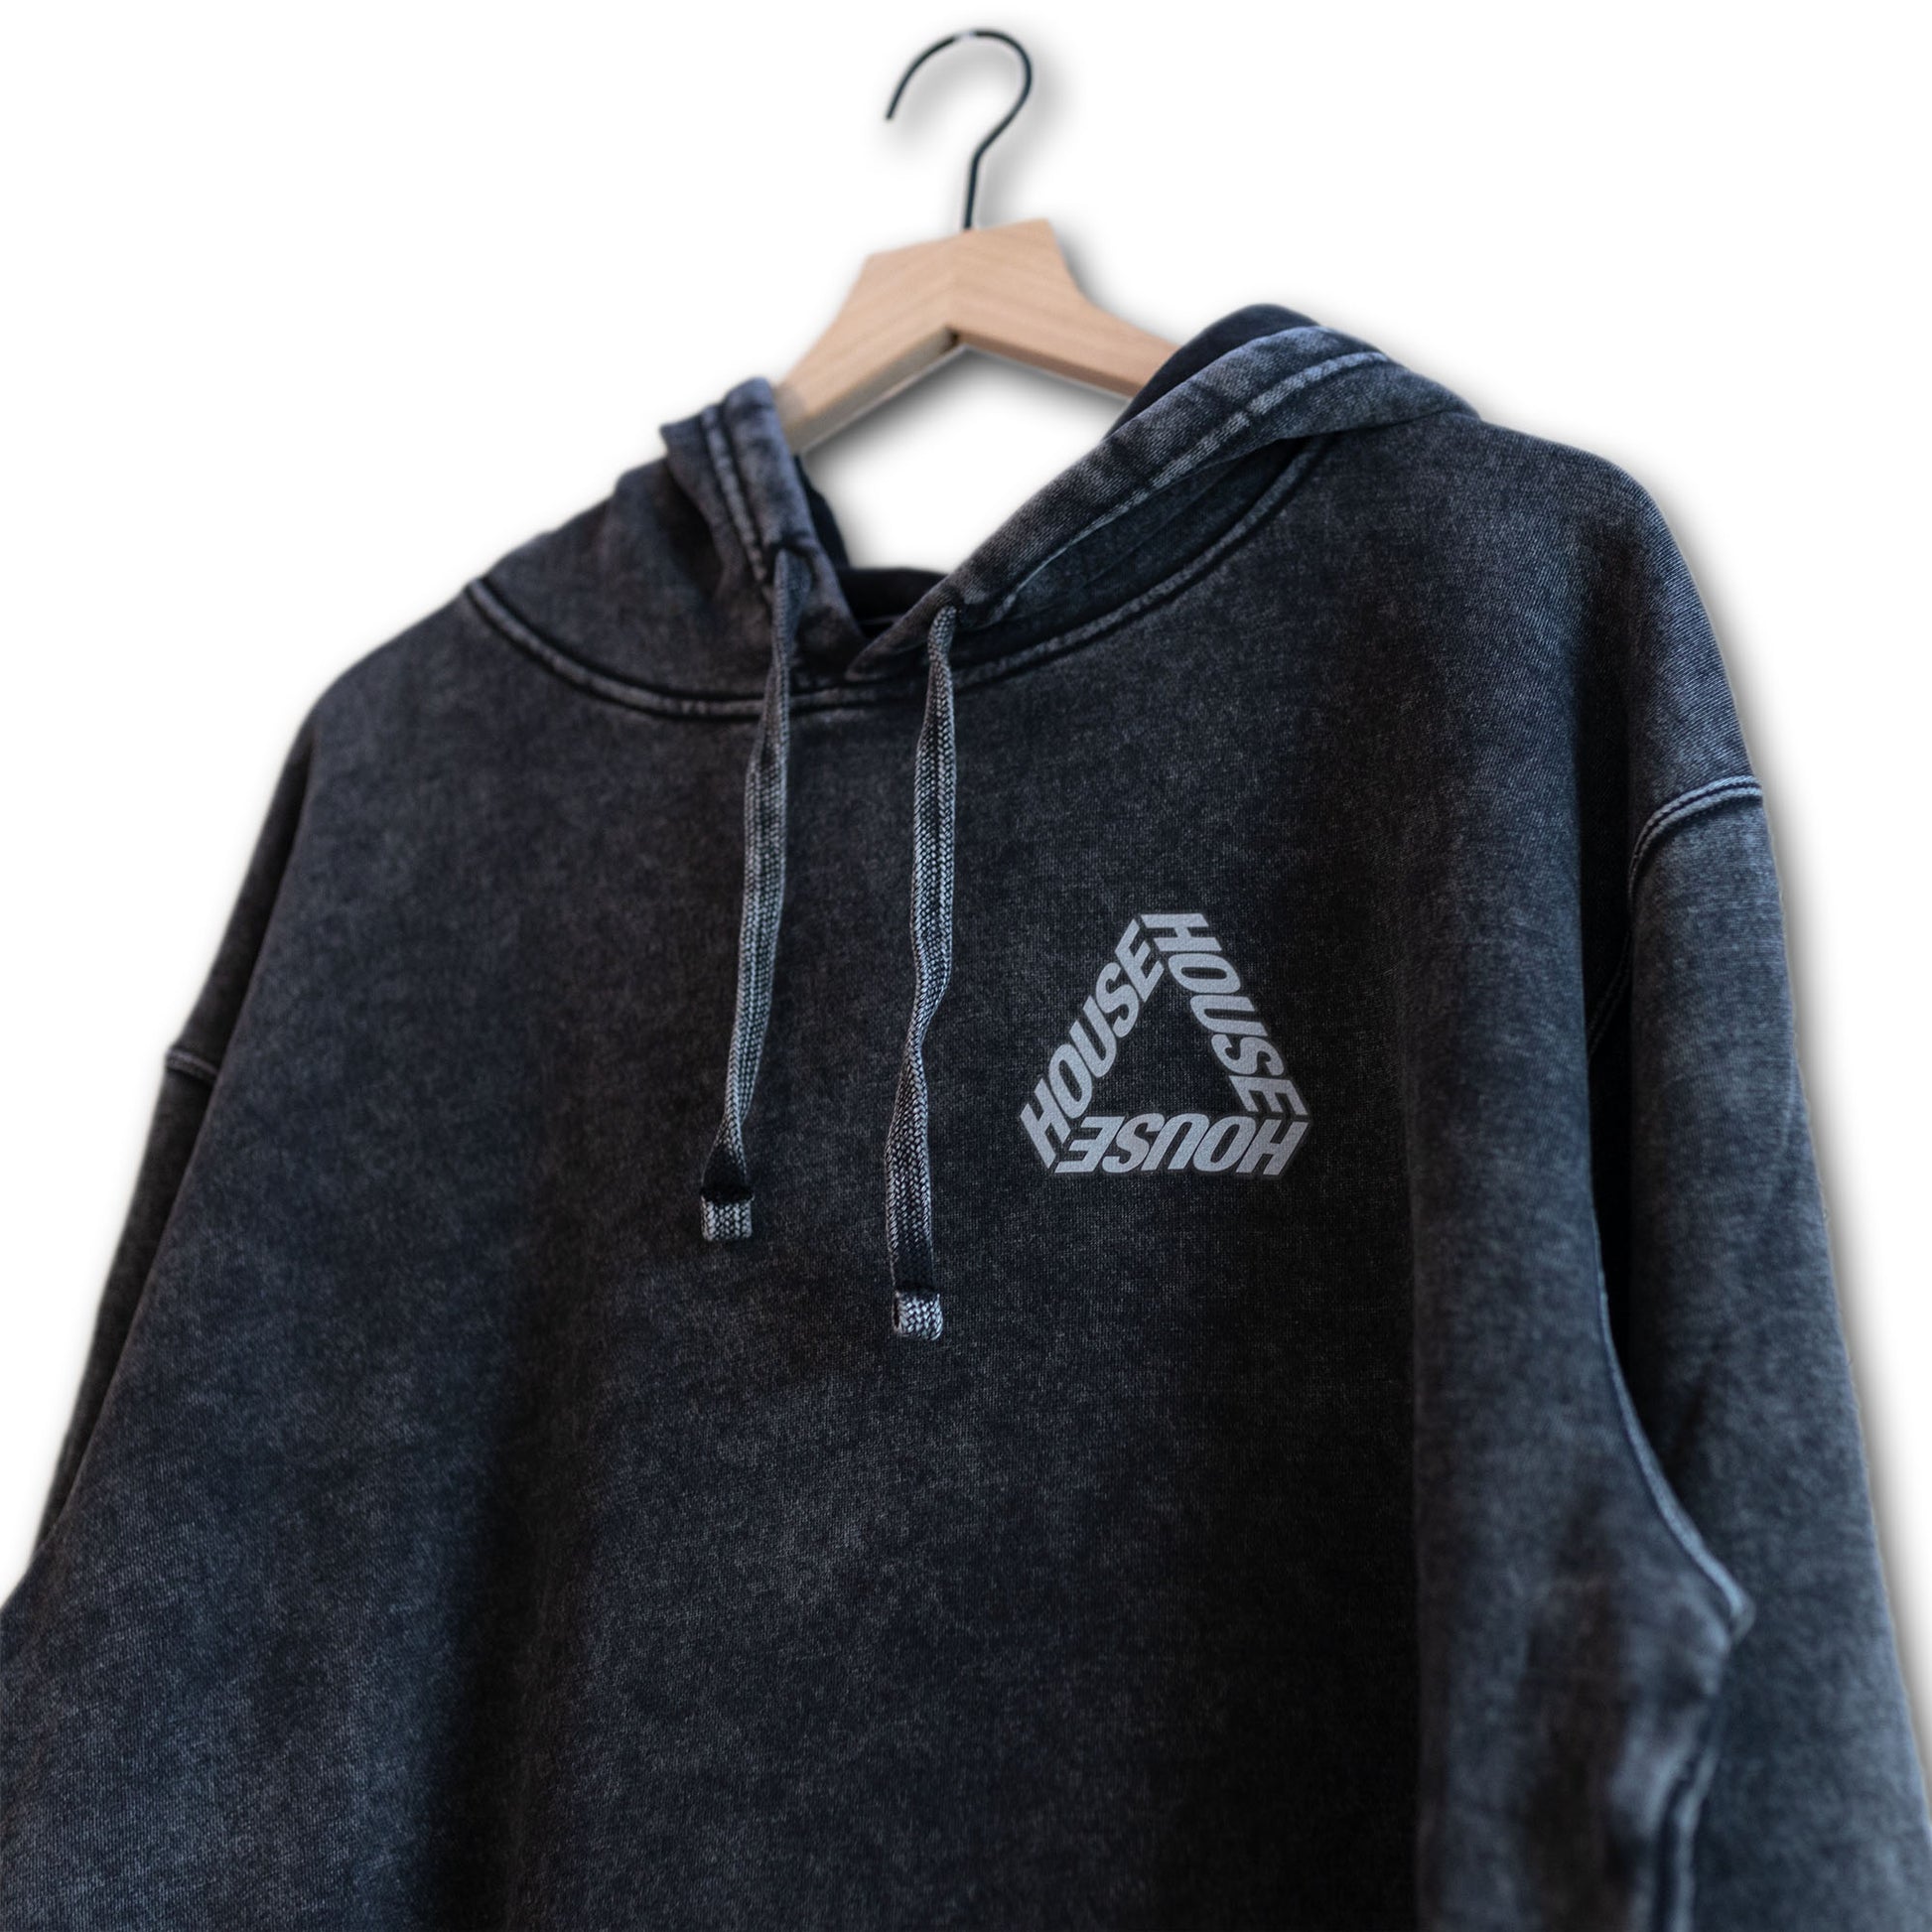 Unisex Midweight Mineral Wash Hooded Pullover